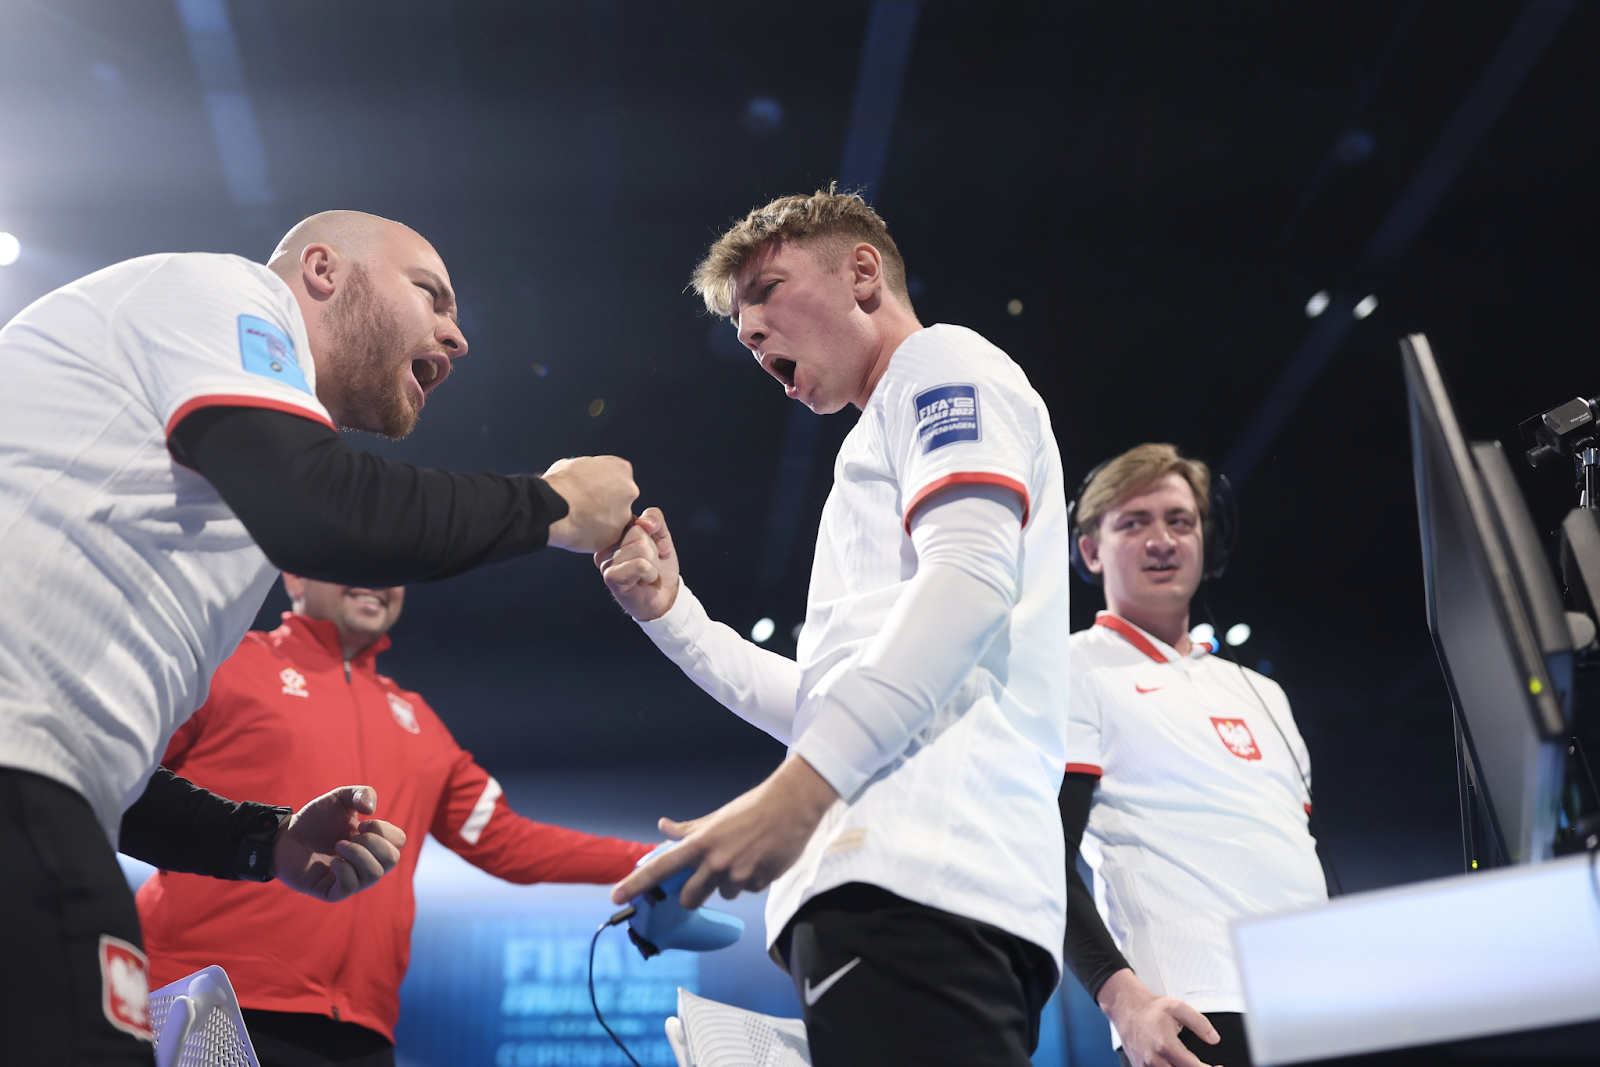 Newcomers - Poland, surprised everyone by qualifying for the final of the FIFAe Nations Cup